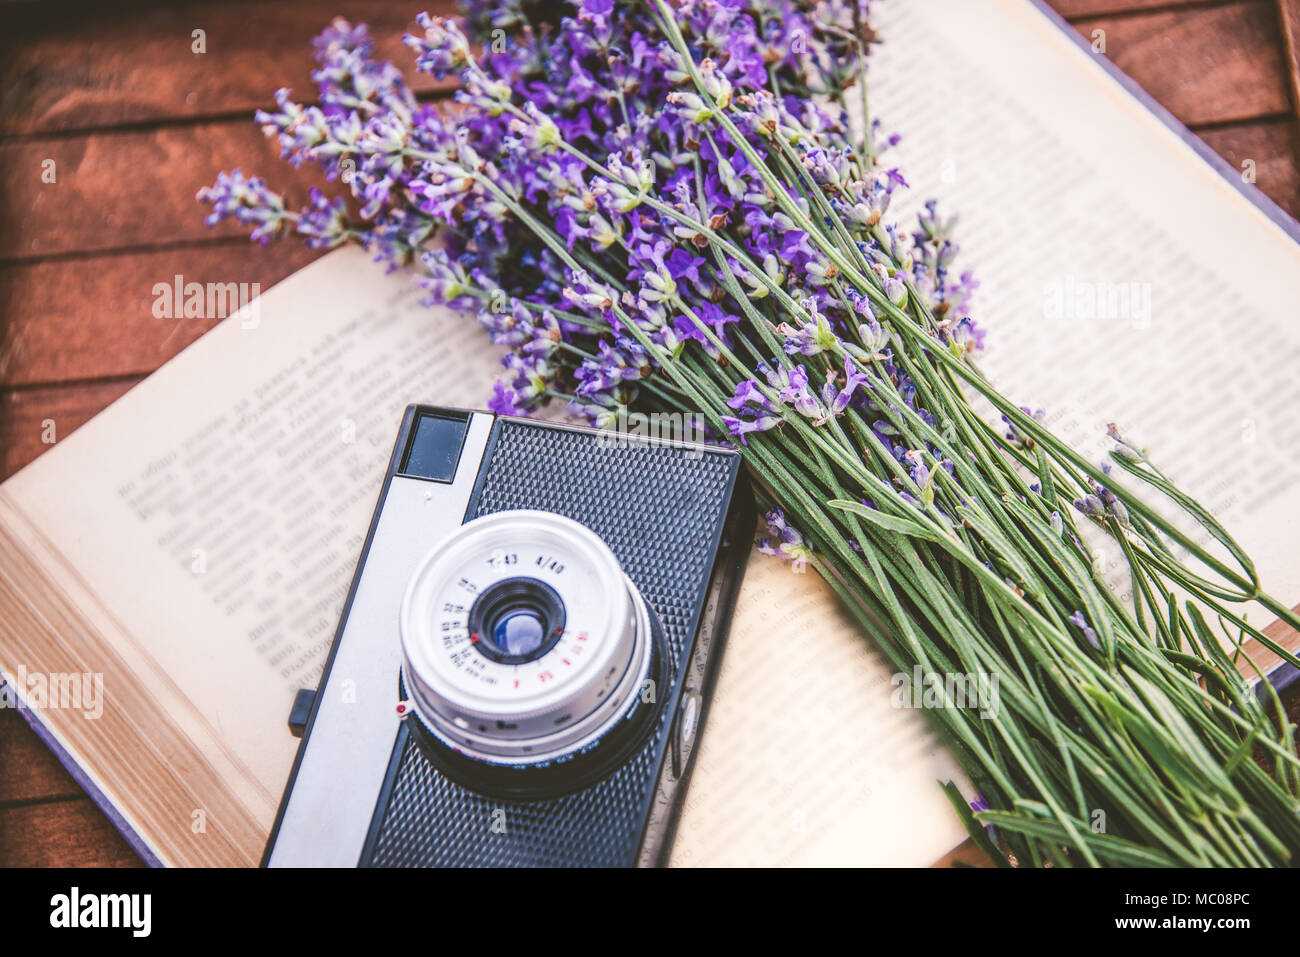 Freshly cutted lavender flowers and a vintage photo camera over an open book.Wooden background Stock Photo